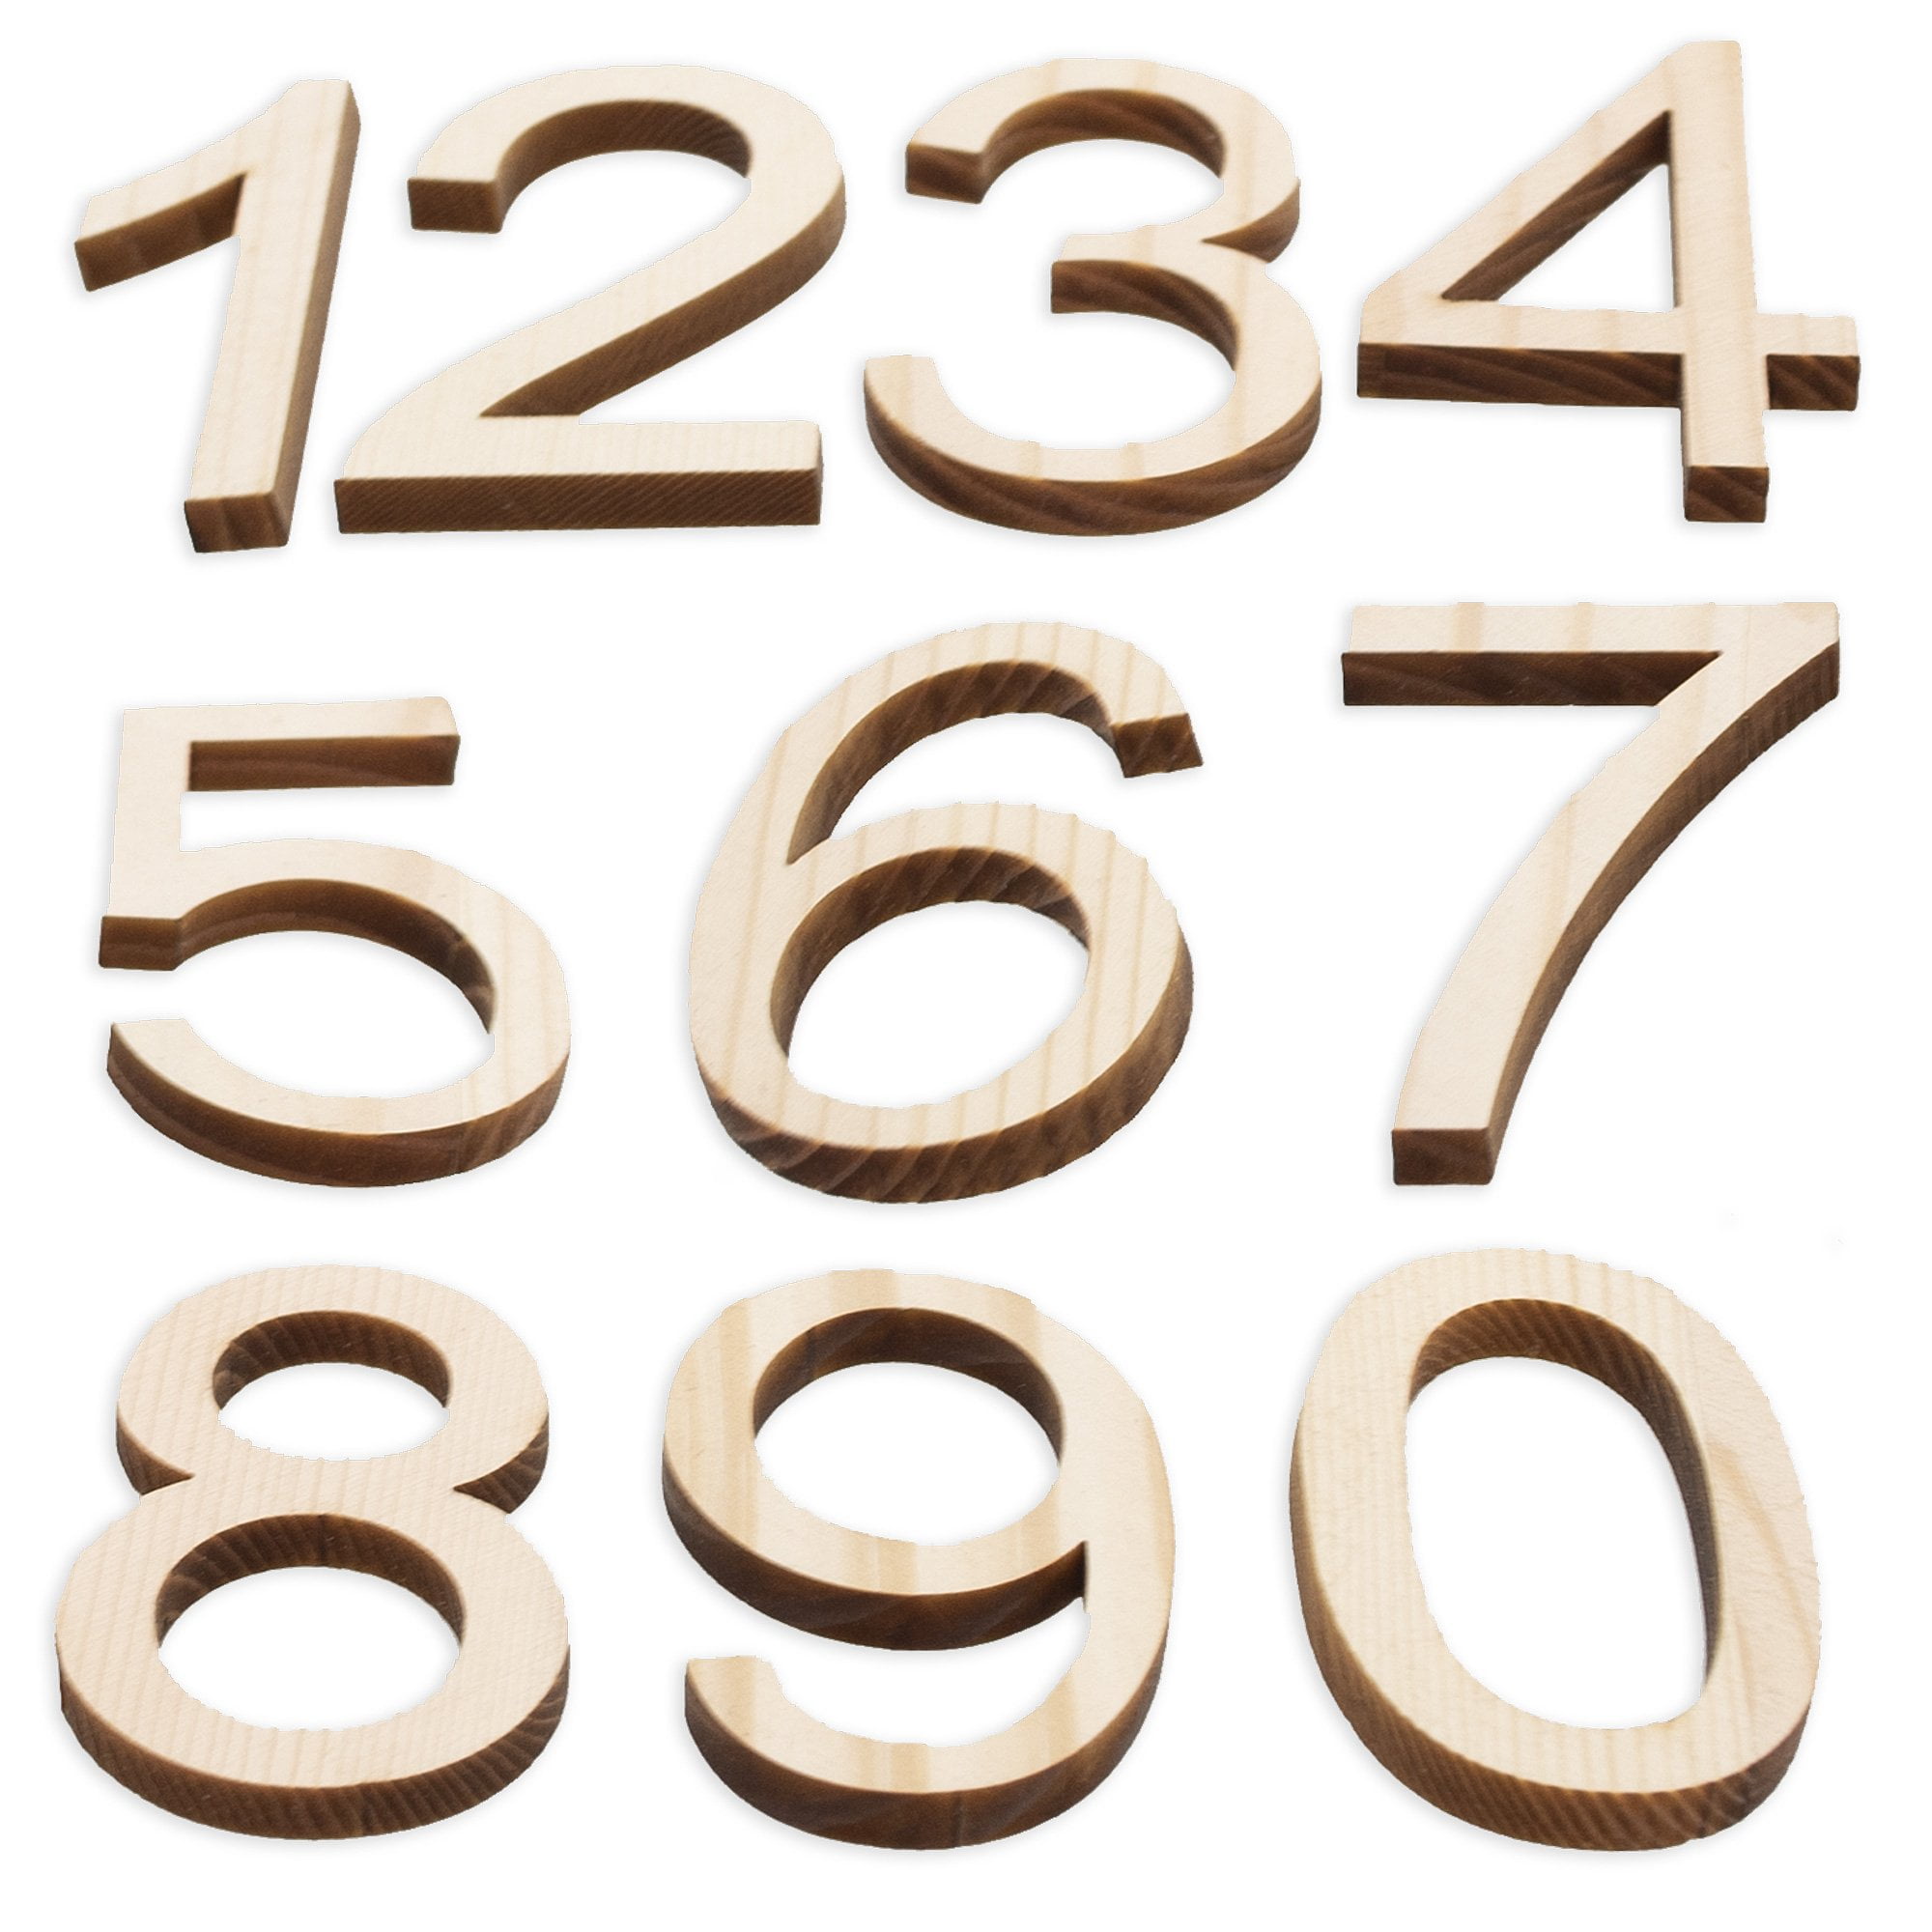 200PCs Wooden Natural Numbers Wooden Numbers Number 0 to 9 for DIY Craft,Wedding Display Decor,Home Decor